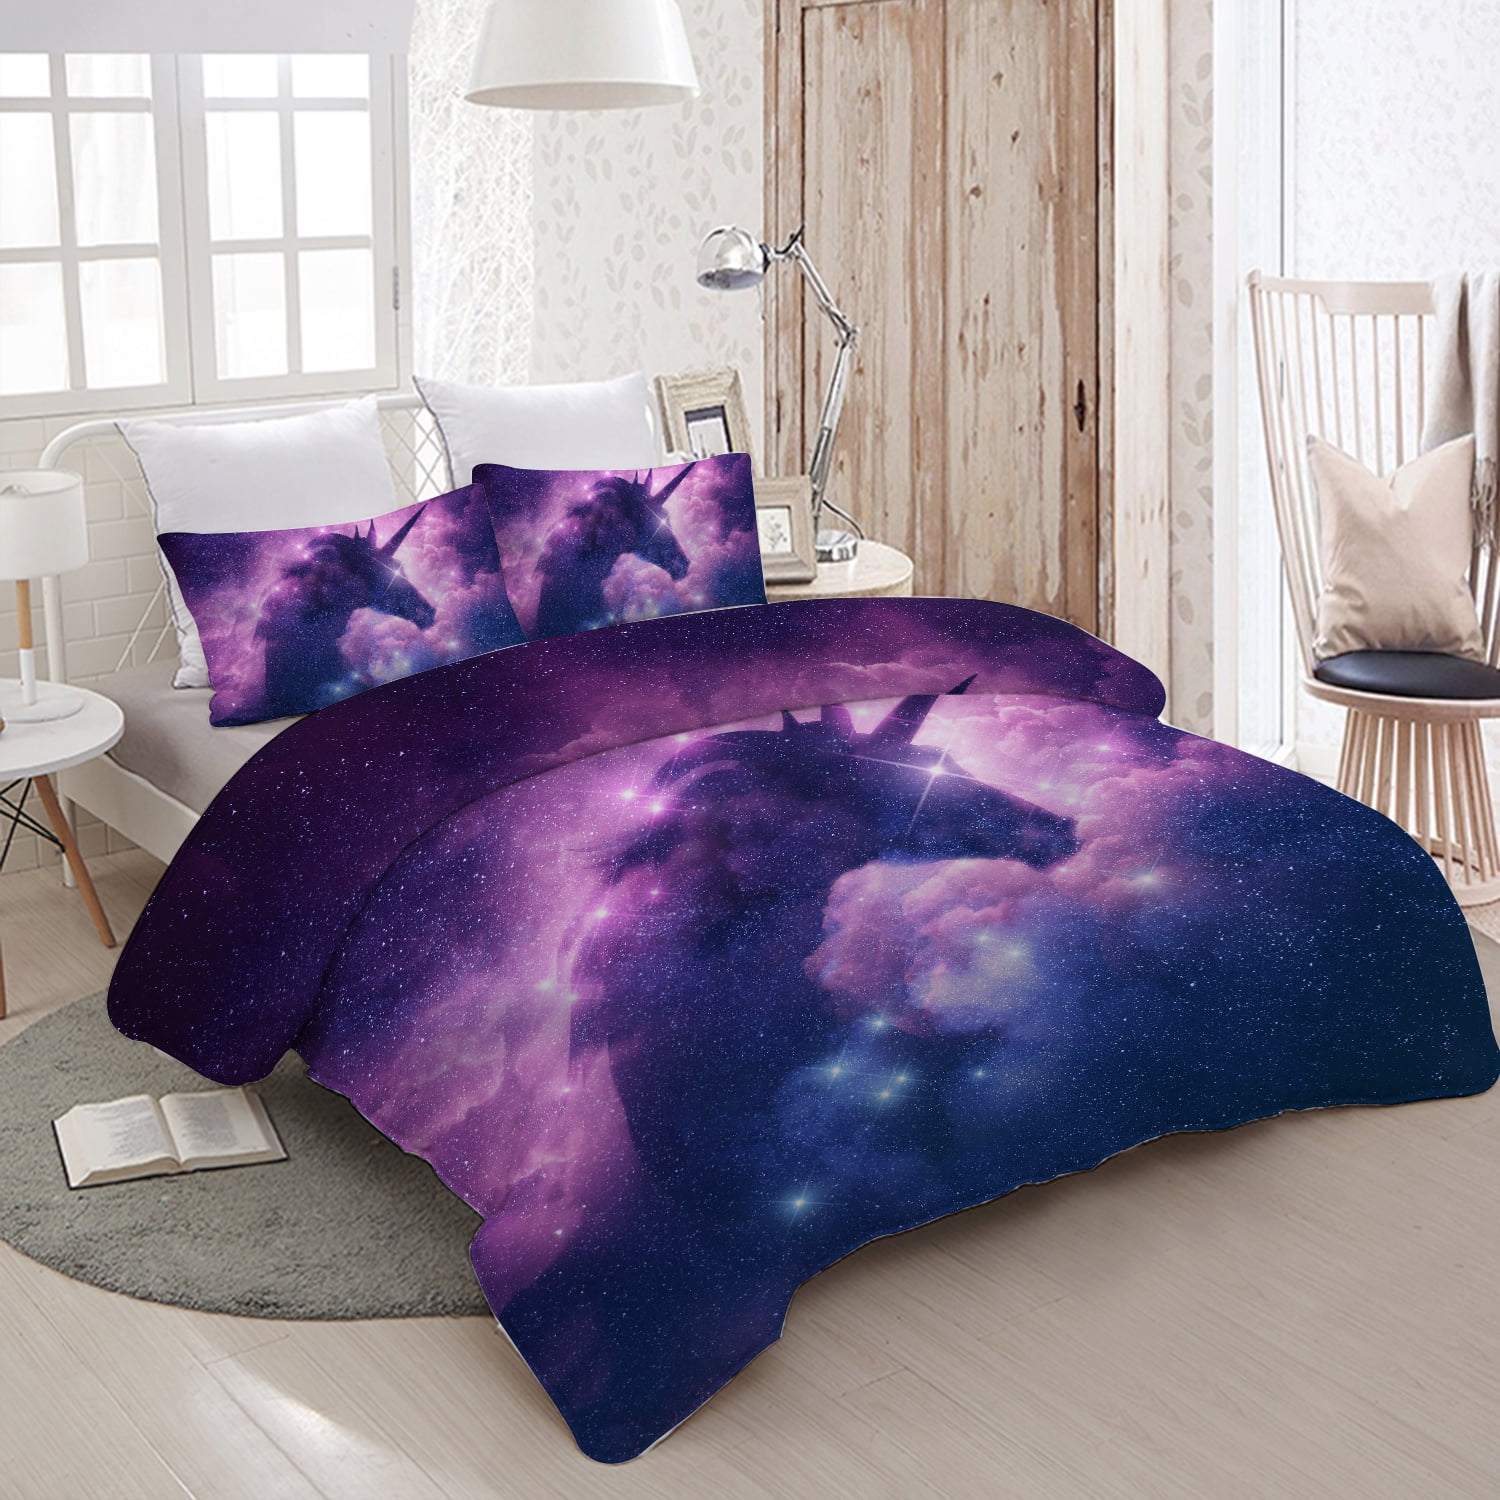 Soft Microfiber Bedding Purple Duvet Cover King 3D Galaxy Purple Butterfly Floral Pattern Printed Duvet Cover with Zipper Closure 3 Pieces, King Size